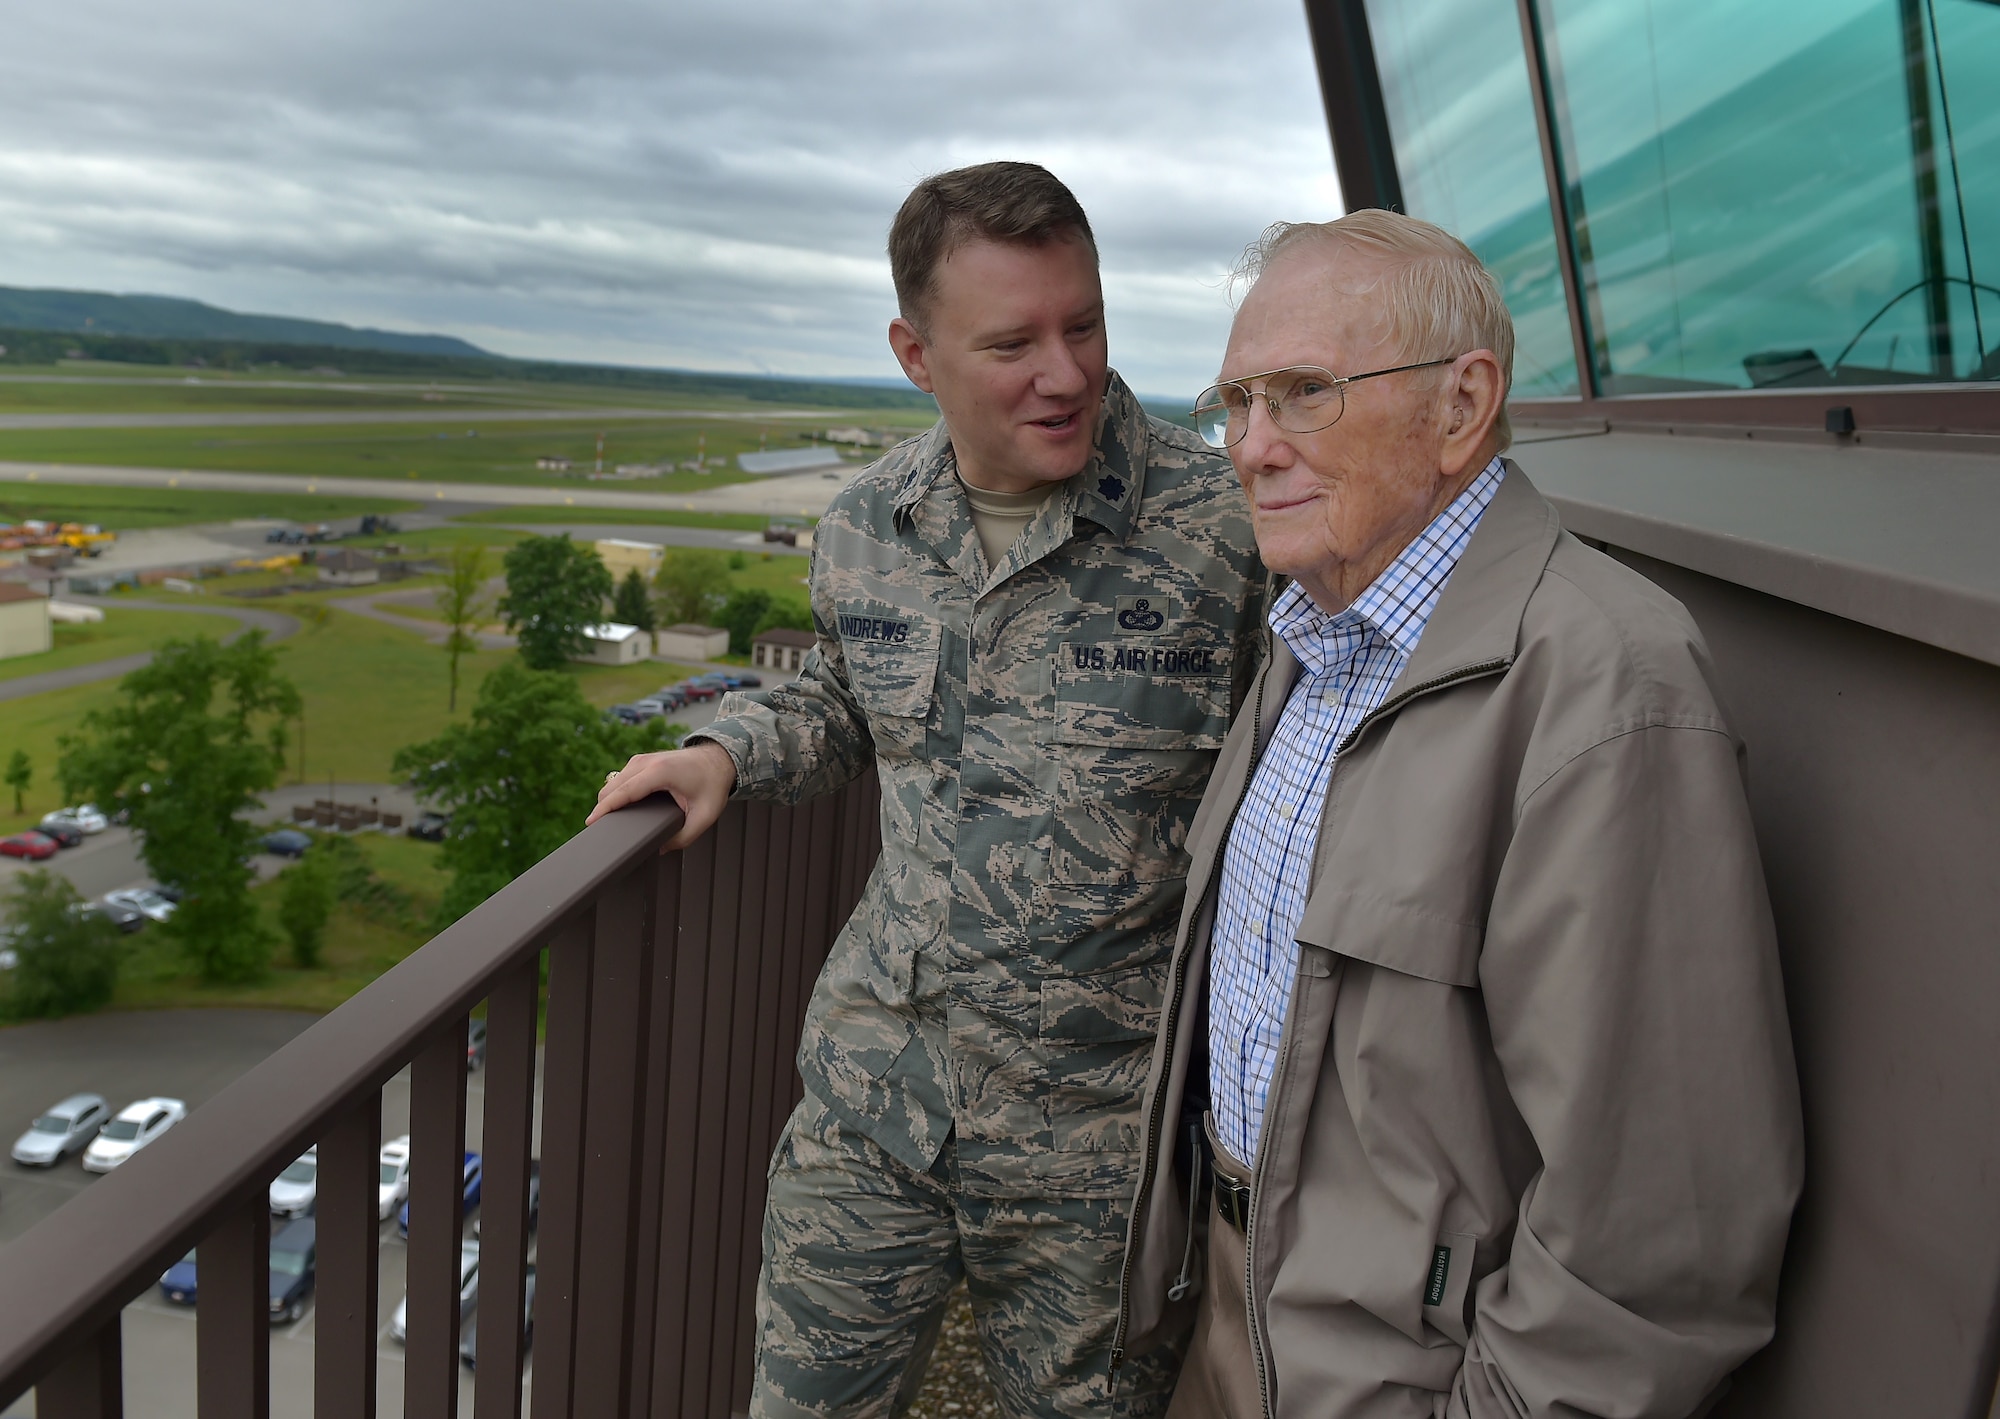 U.S. Air Force Lt. Col. Michael Andrews, Deputy Director, Public Affairs and Communication, USAFE-AFAFRICA, speaks with his grandfather, Chief Master Sgt. (Retired) Kenneth Andrews, while visiting the Air Traffic Control tower on Ramstein Air Base, Germany, May 24, 2016. Andrews entered the Air Force in 1947 and served 30 years as an Air Traffic Controller; three years of his service were spent at Ramstein. 